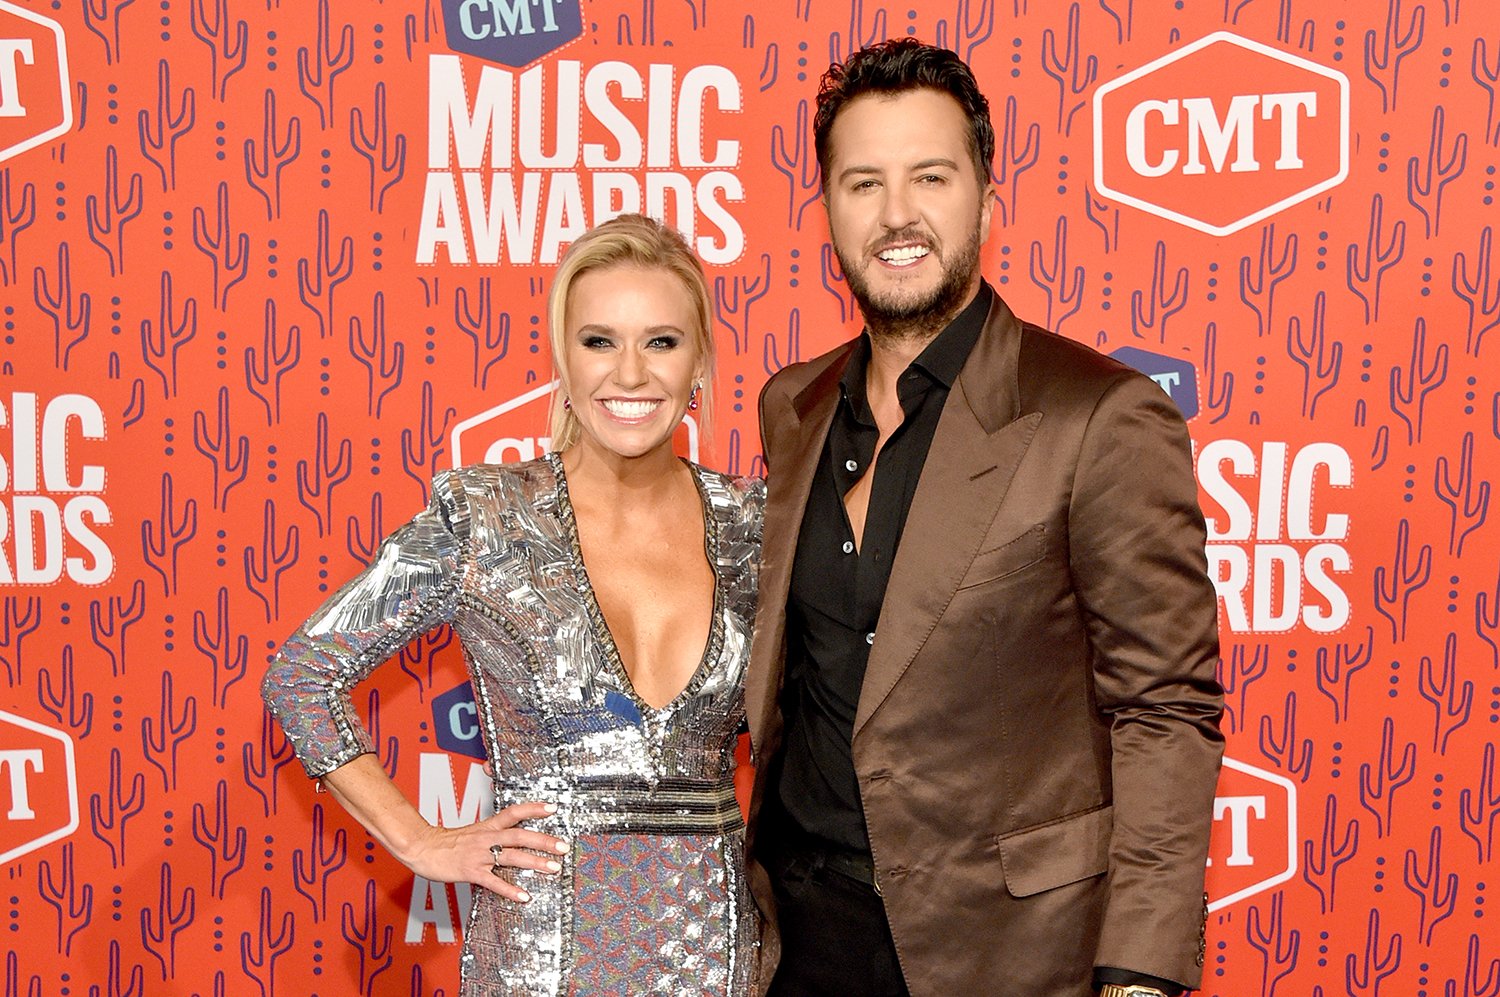 Luke Bryan and his wife, Caroline, who pulled a chip prank on American Idol